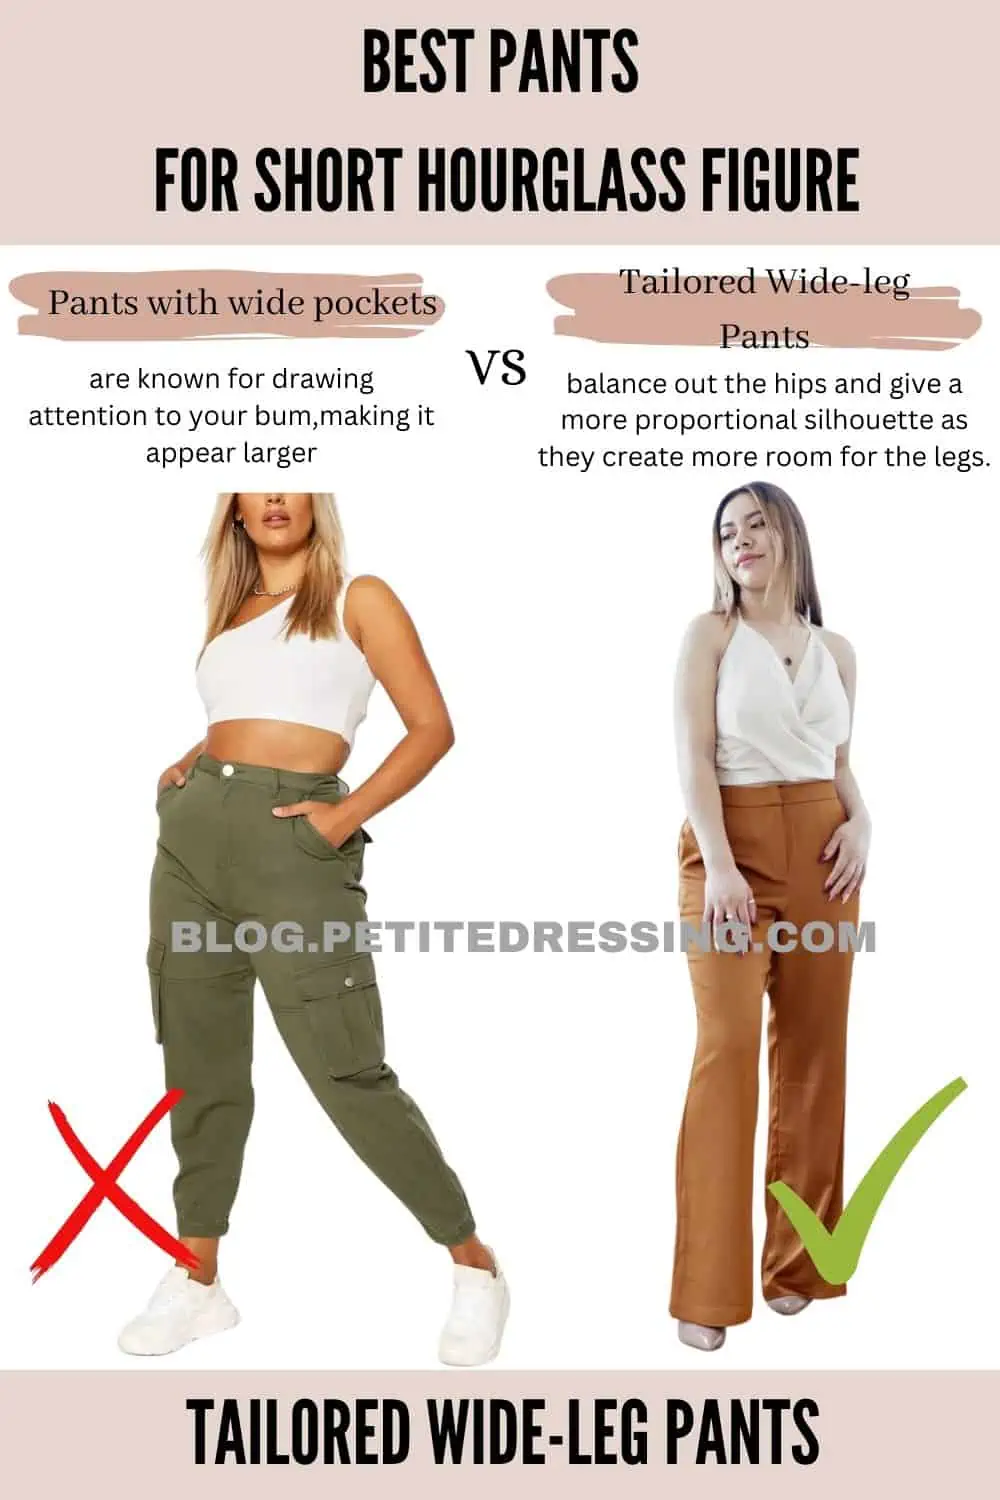 Pants Style Guide for Short Hourglass Figure - Petite Dressing